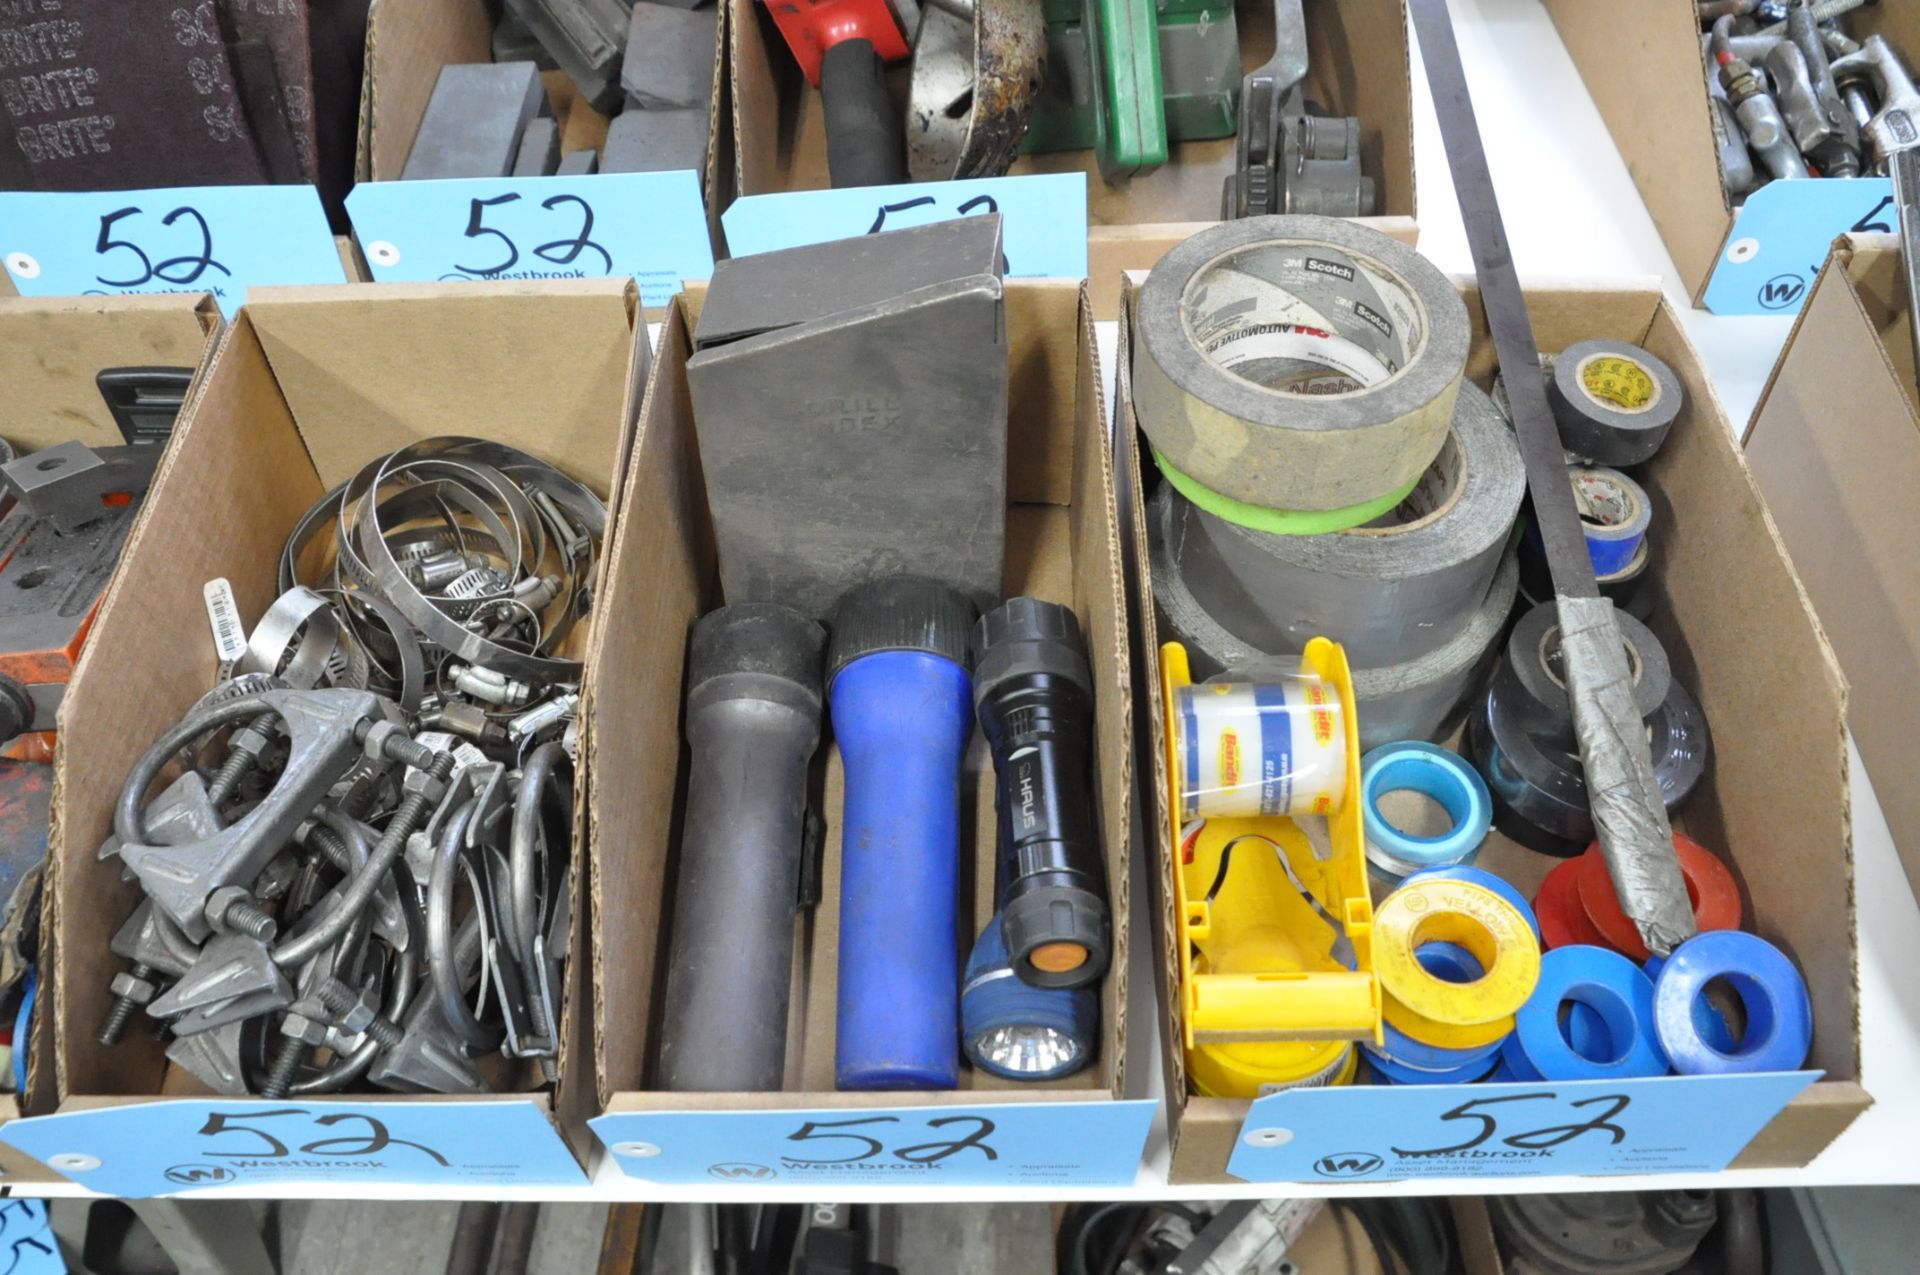 Lot-Scotchbrite Pads, Brushes, Sharpening Stones, Thread Tape, Muffler Clamps, Etc. - Image 5 of 5